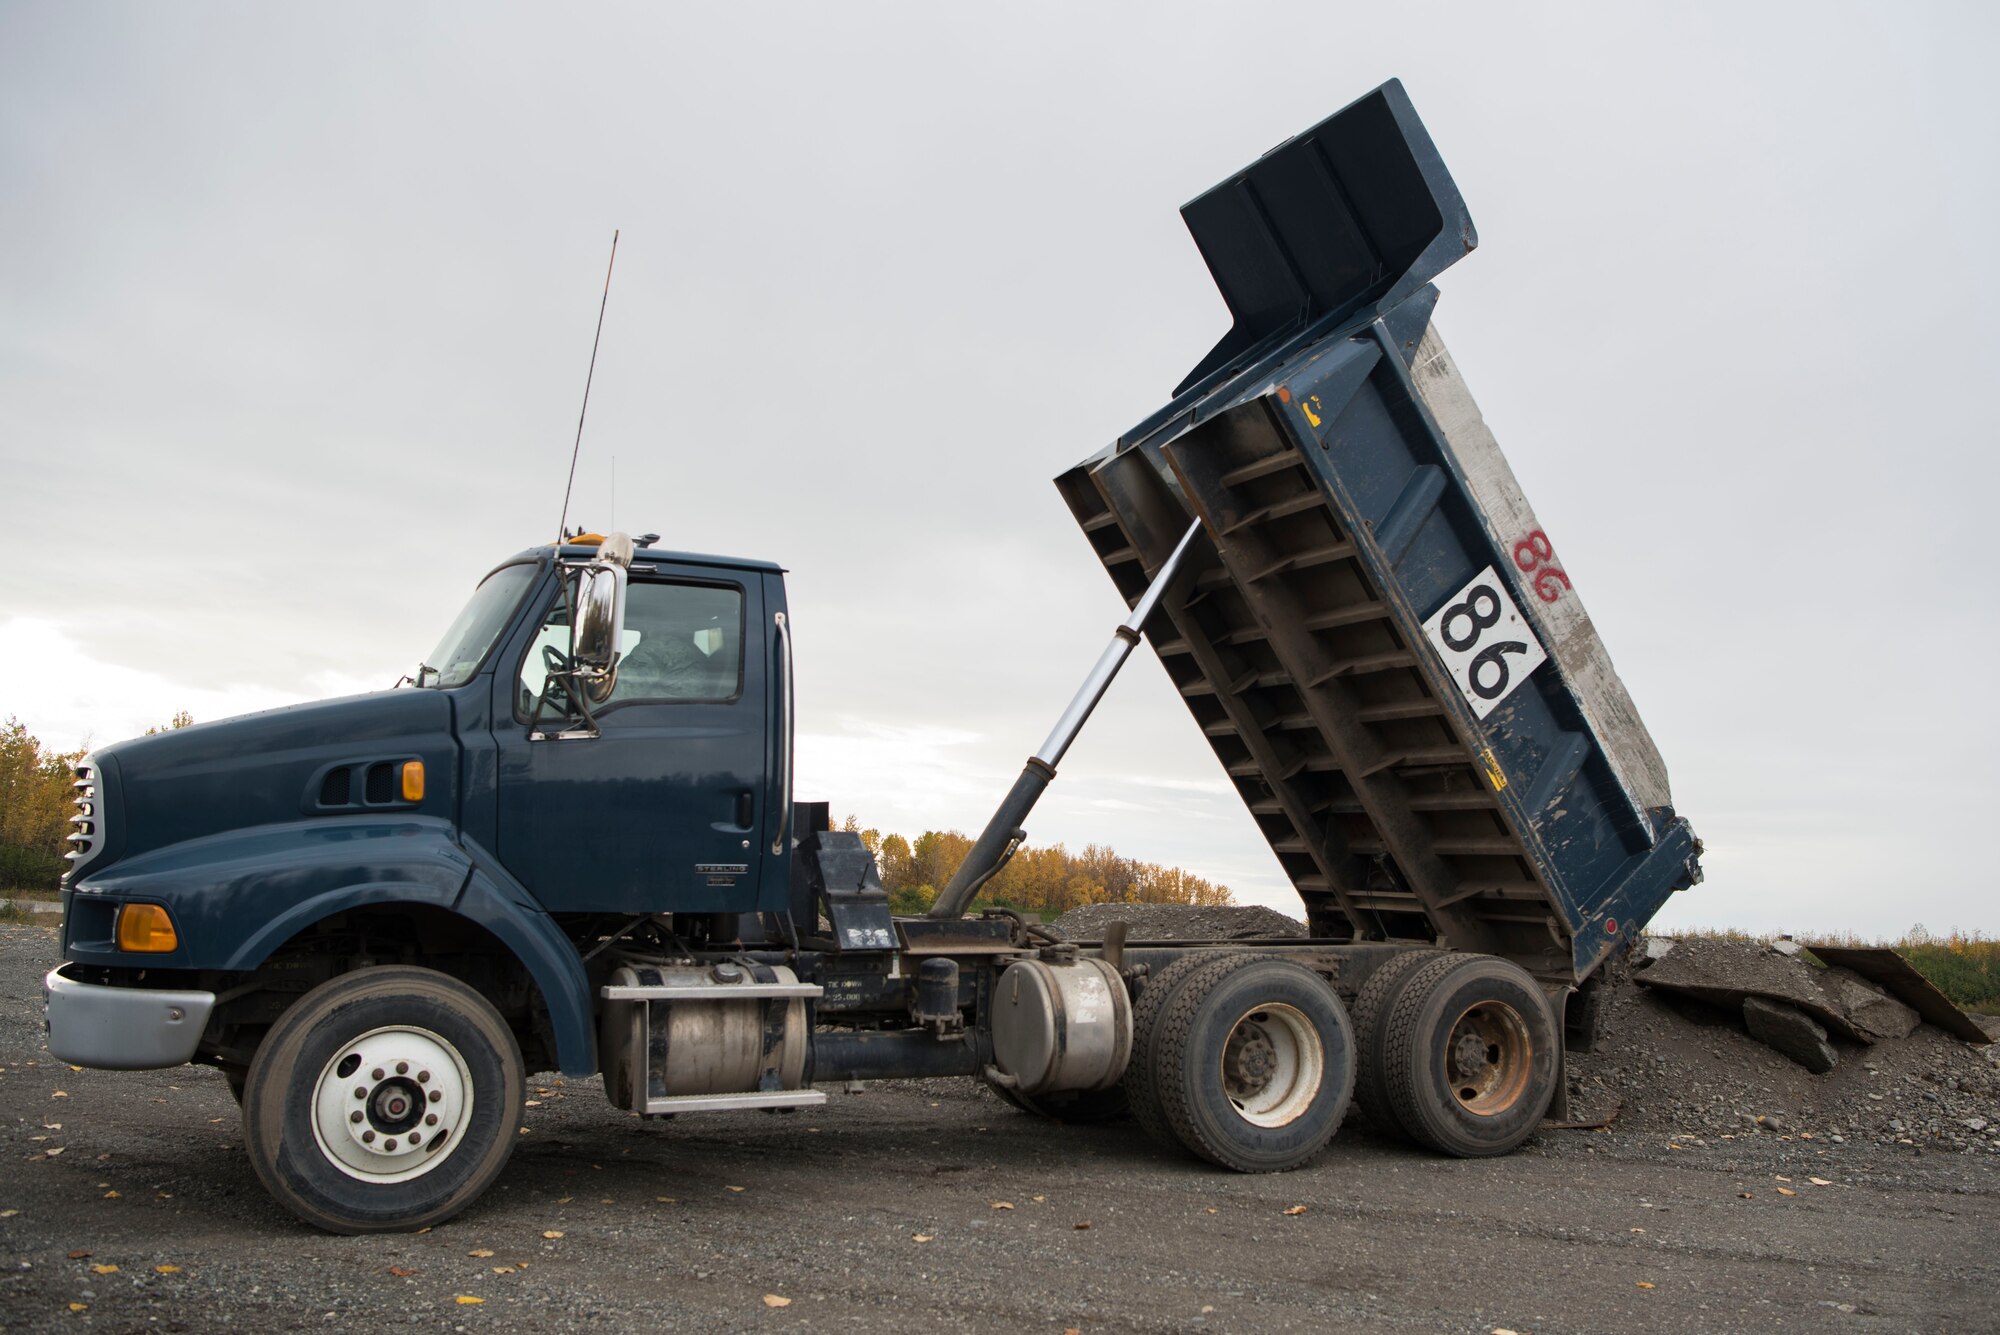 U.S. Air Force Airman 1st Class Shane Leaphart, 773d Civil Engineer Squadron engineer assistant, unloads a dump truck at Joint Base Elmendorf-Richardson, Alaska, Oct. 3, 2018. The 773d CES snow barn personnel train augmentees on properly operating snow-removal equipment, in preparation for the coming winter.